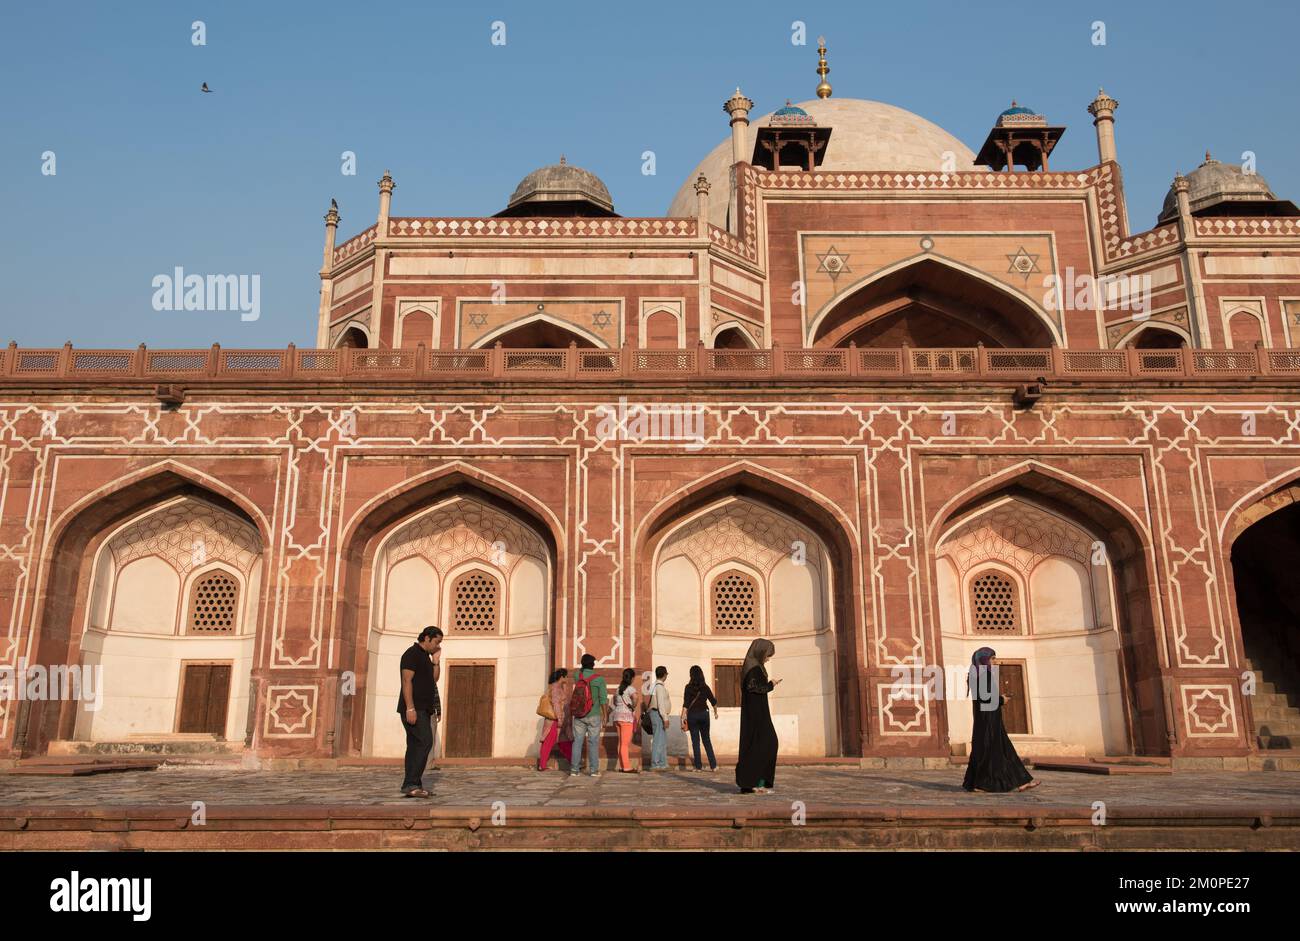 Tourist people walking in front of facade of famous Humayuns tomb landmark in new Delhi, india Stock Photo